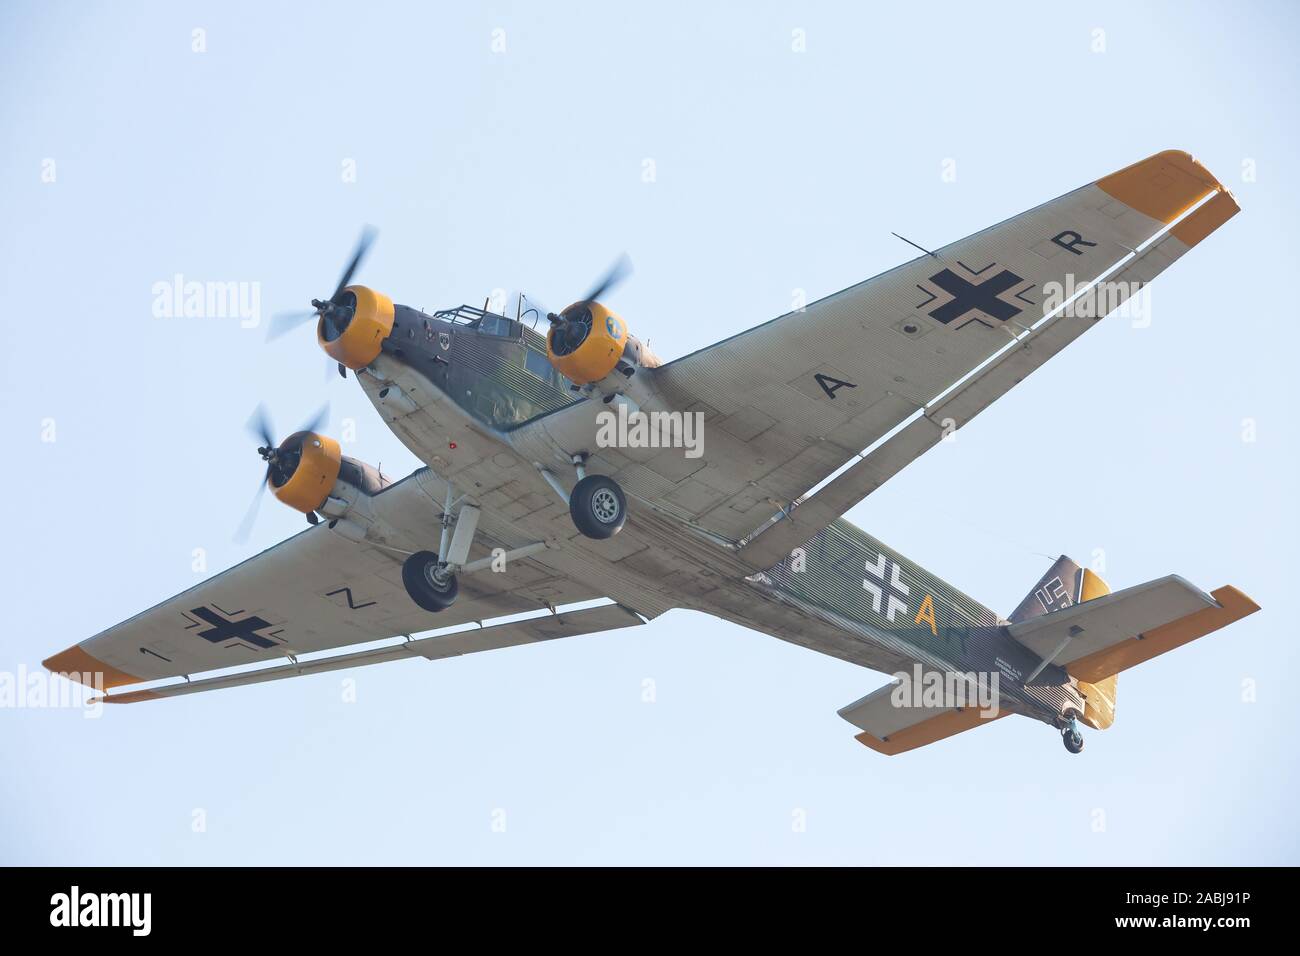 MONROE, NC (USA) - November 9, 2019:  A German Junkers JU52 transport aircraft in flight at the Warbirds Over Monroe Air Show. Stock Photo